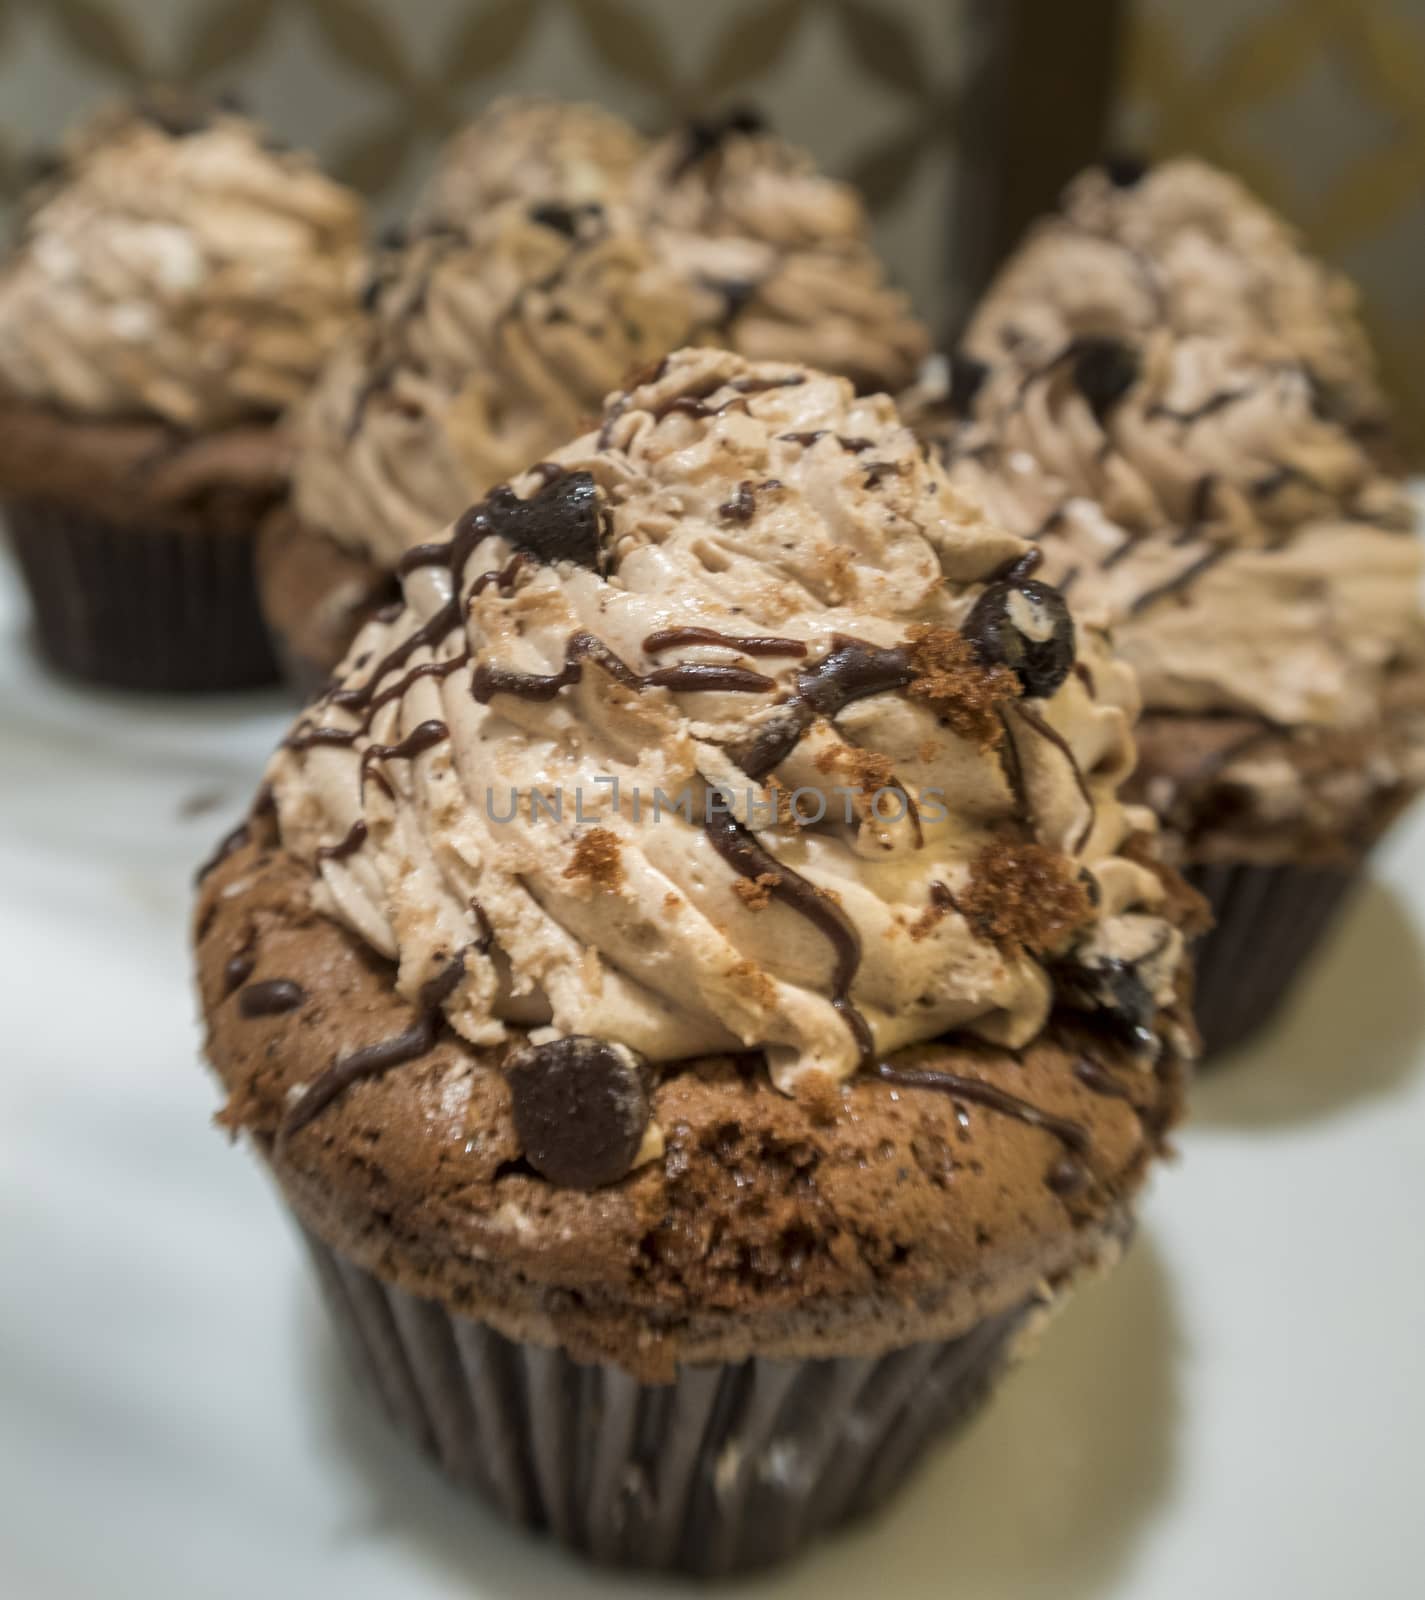 Homemade Chocolate Cupcake with chocolate frosting, selective focus